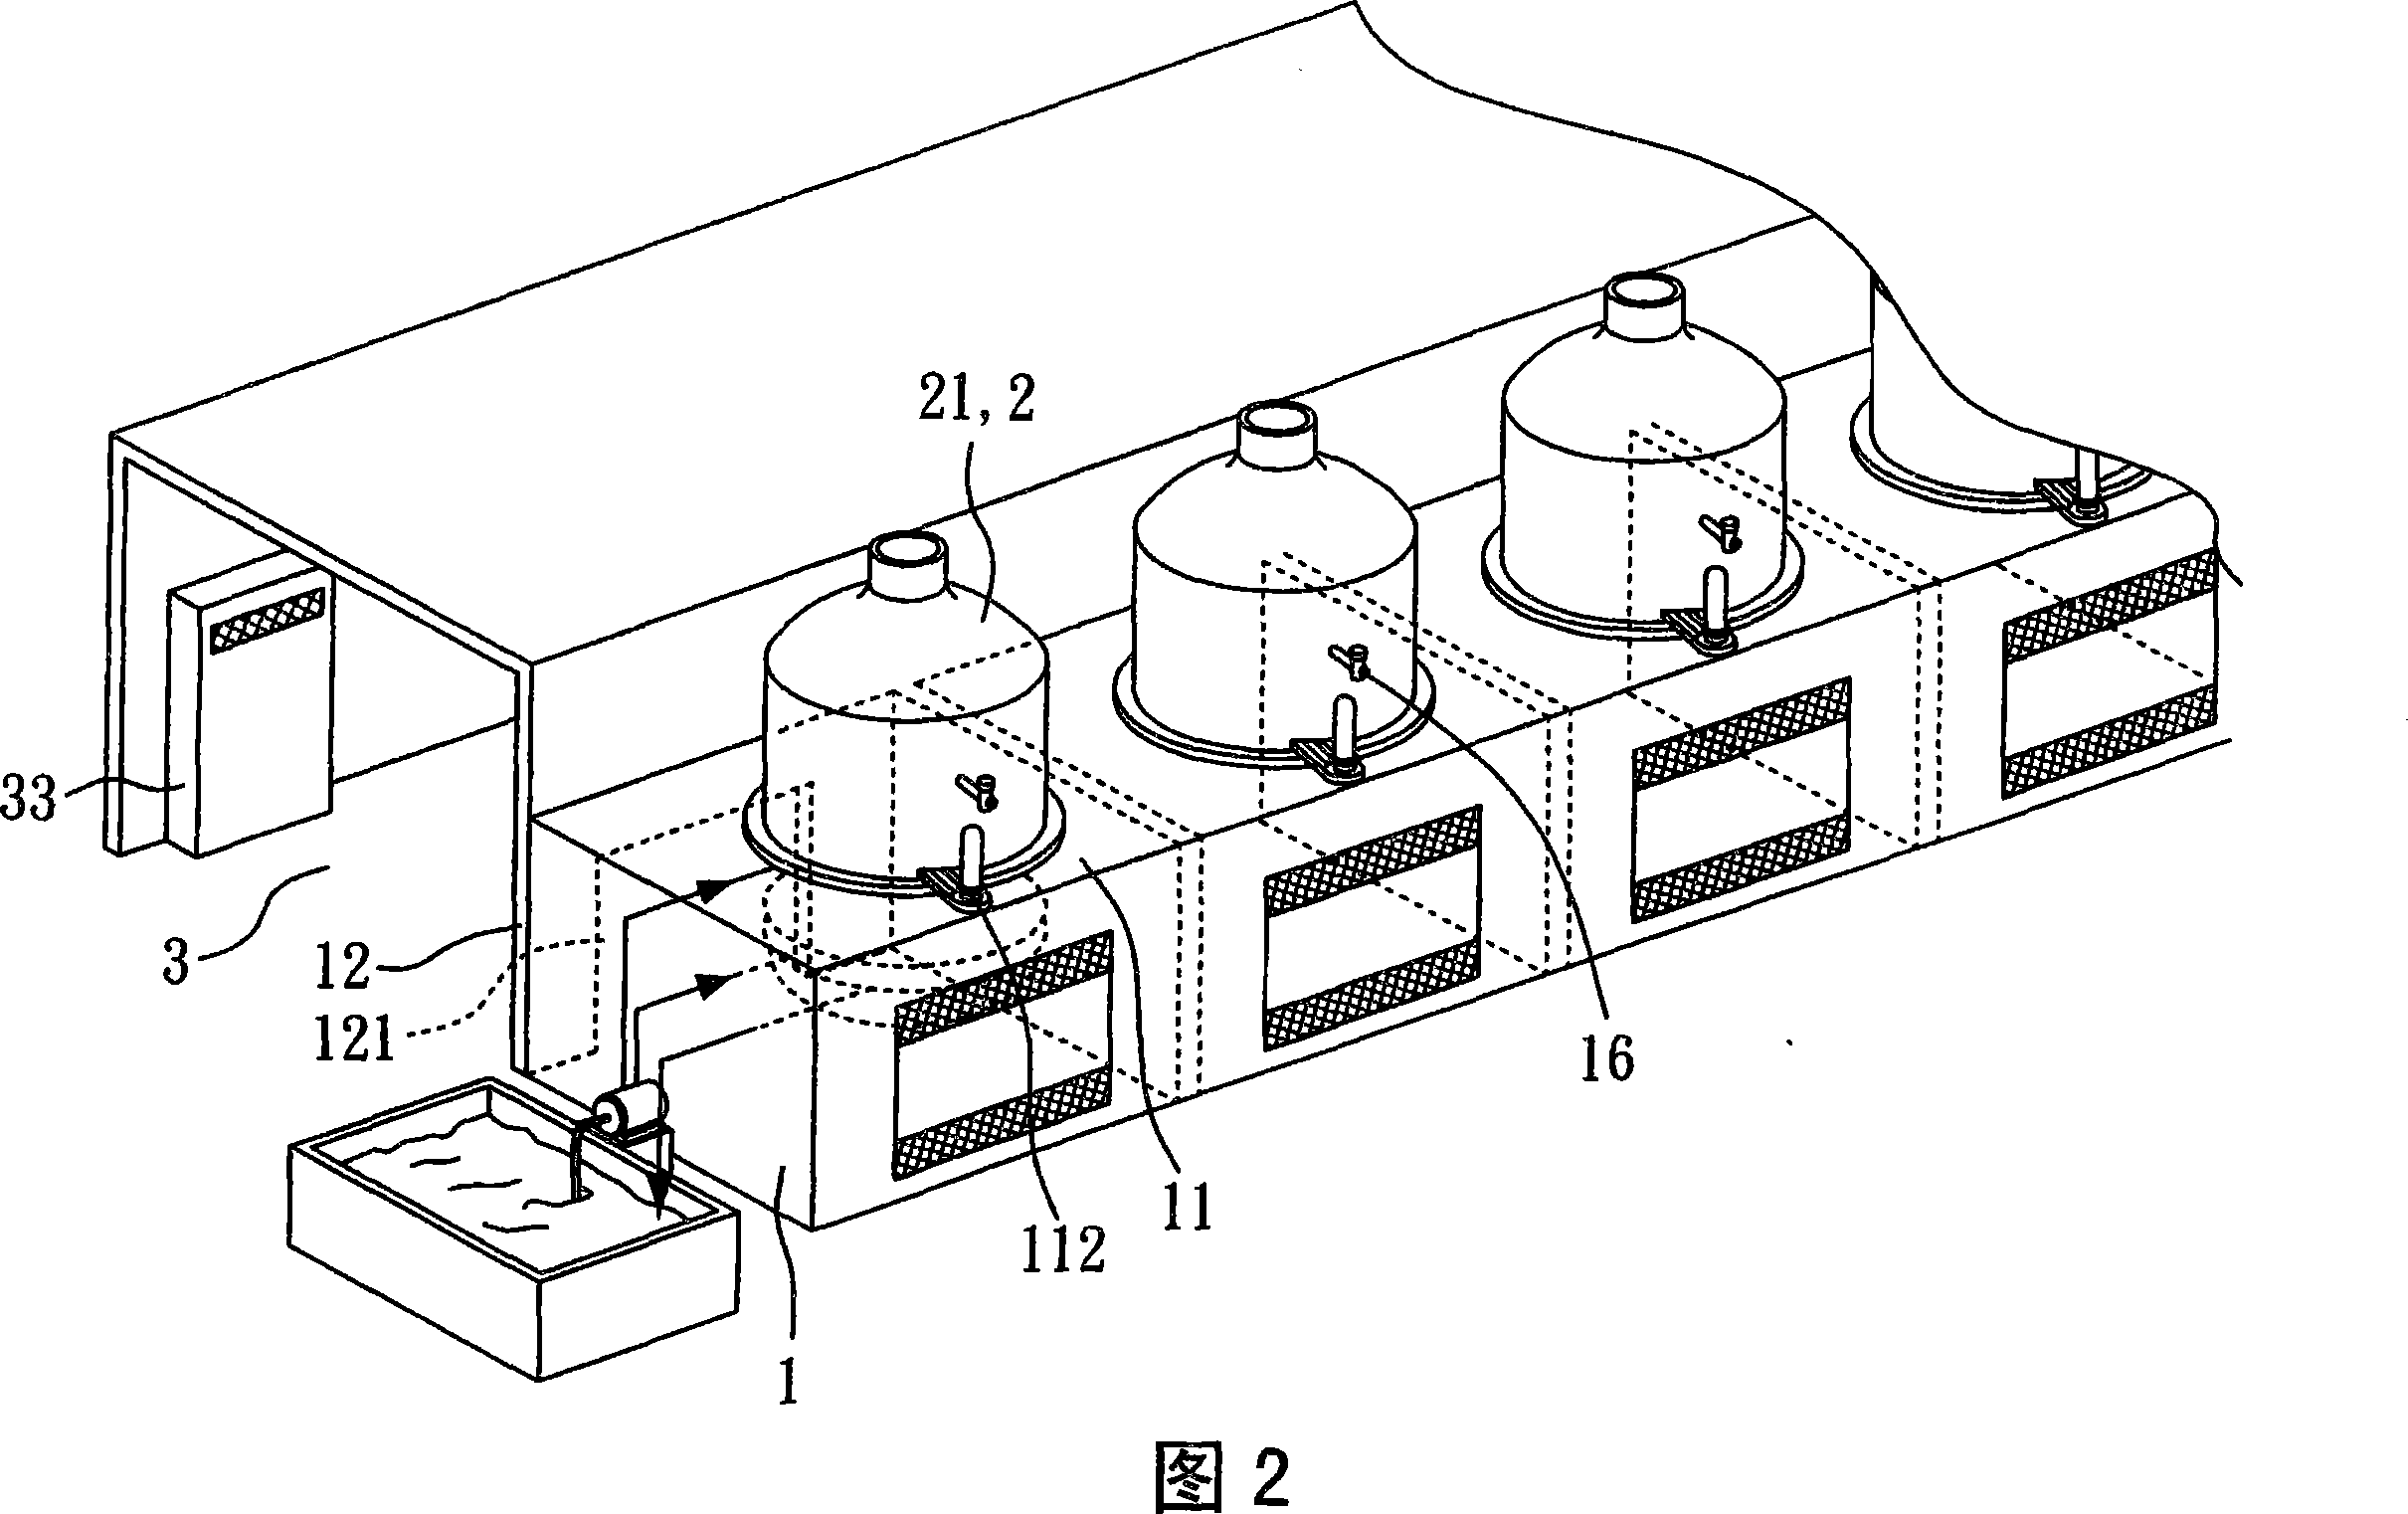 Crystal growth furnace body structure with emergency decompression arrangement